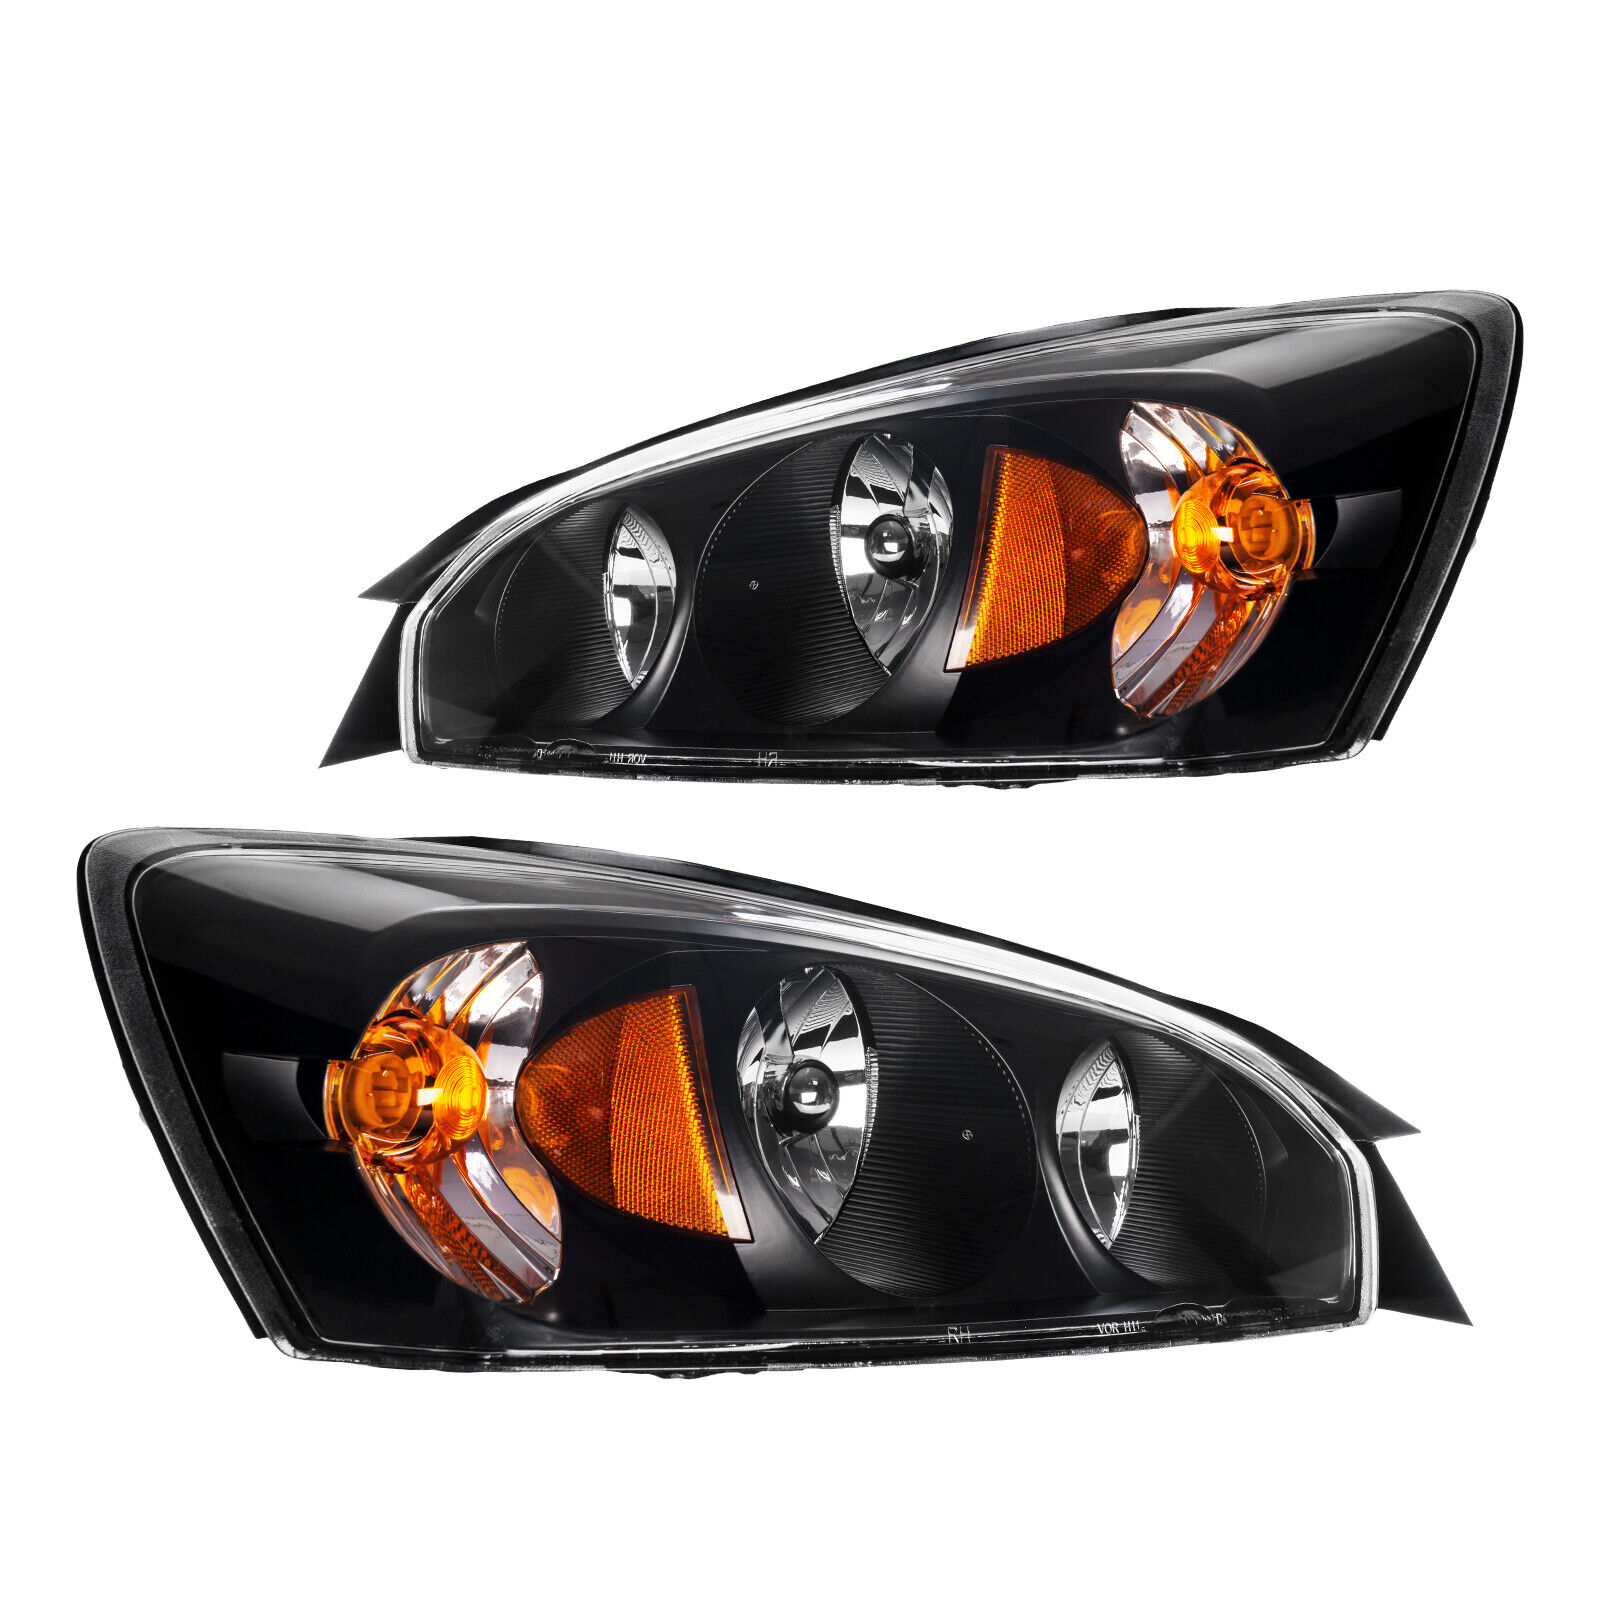 Fits 04-08 Chevy Malibu Headlights Lights Lamps Replacement Pair Set 2004-2008